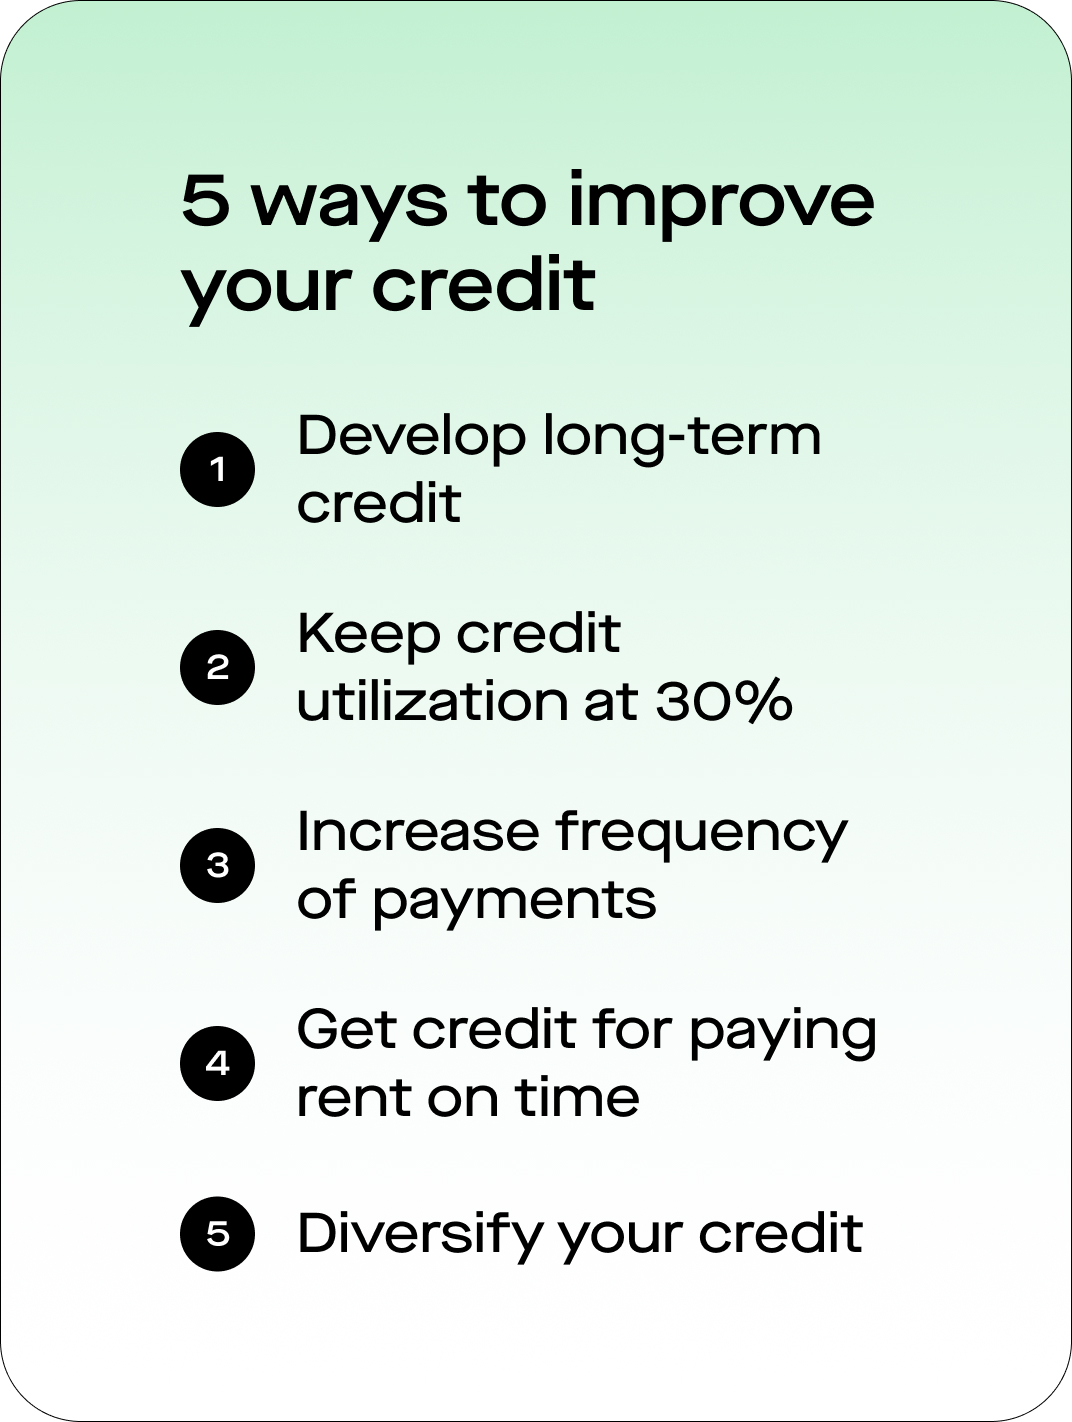 Graphic of 5 ways to improve your credit. "1 - develop long term credit. 2 - Keep credit utilization at 30%. 3 - Increase frequency of payments. 4 - Get credit for paying rent on time. 5 - Diversify your credit."